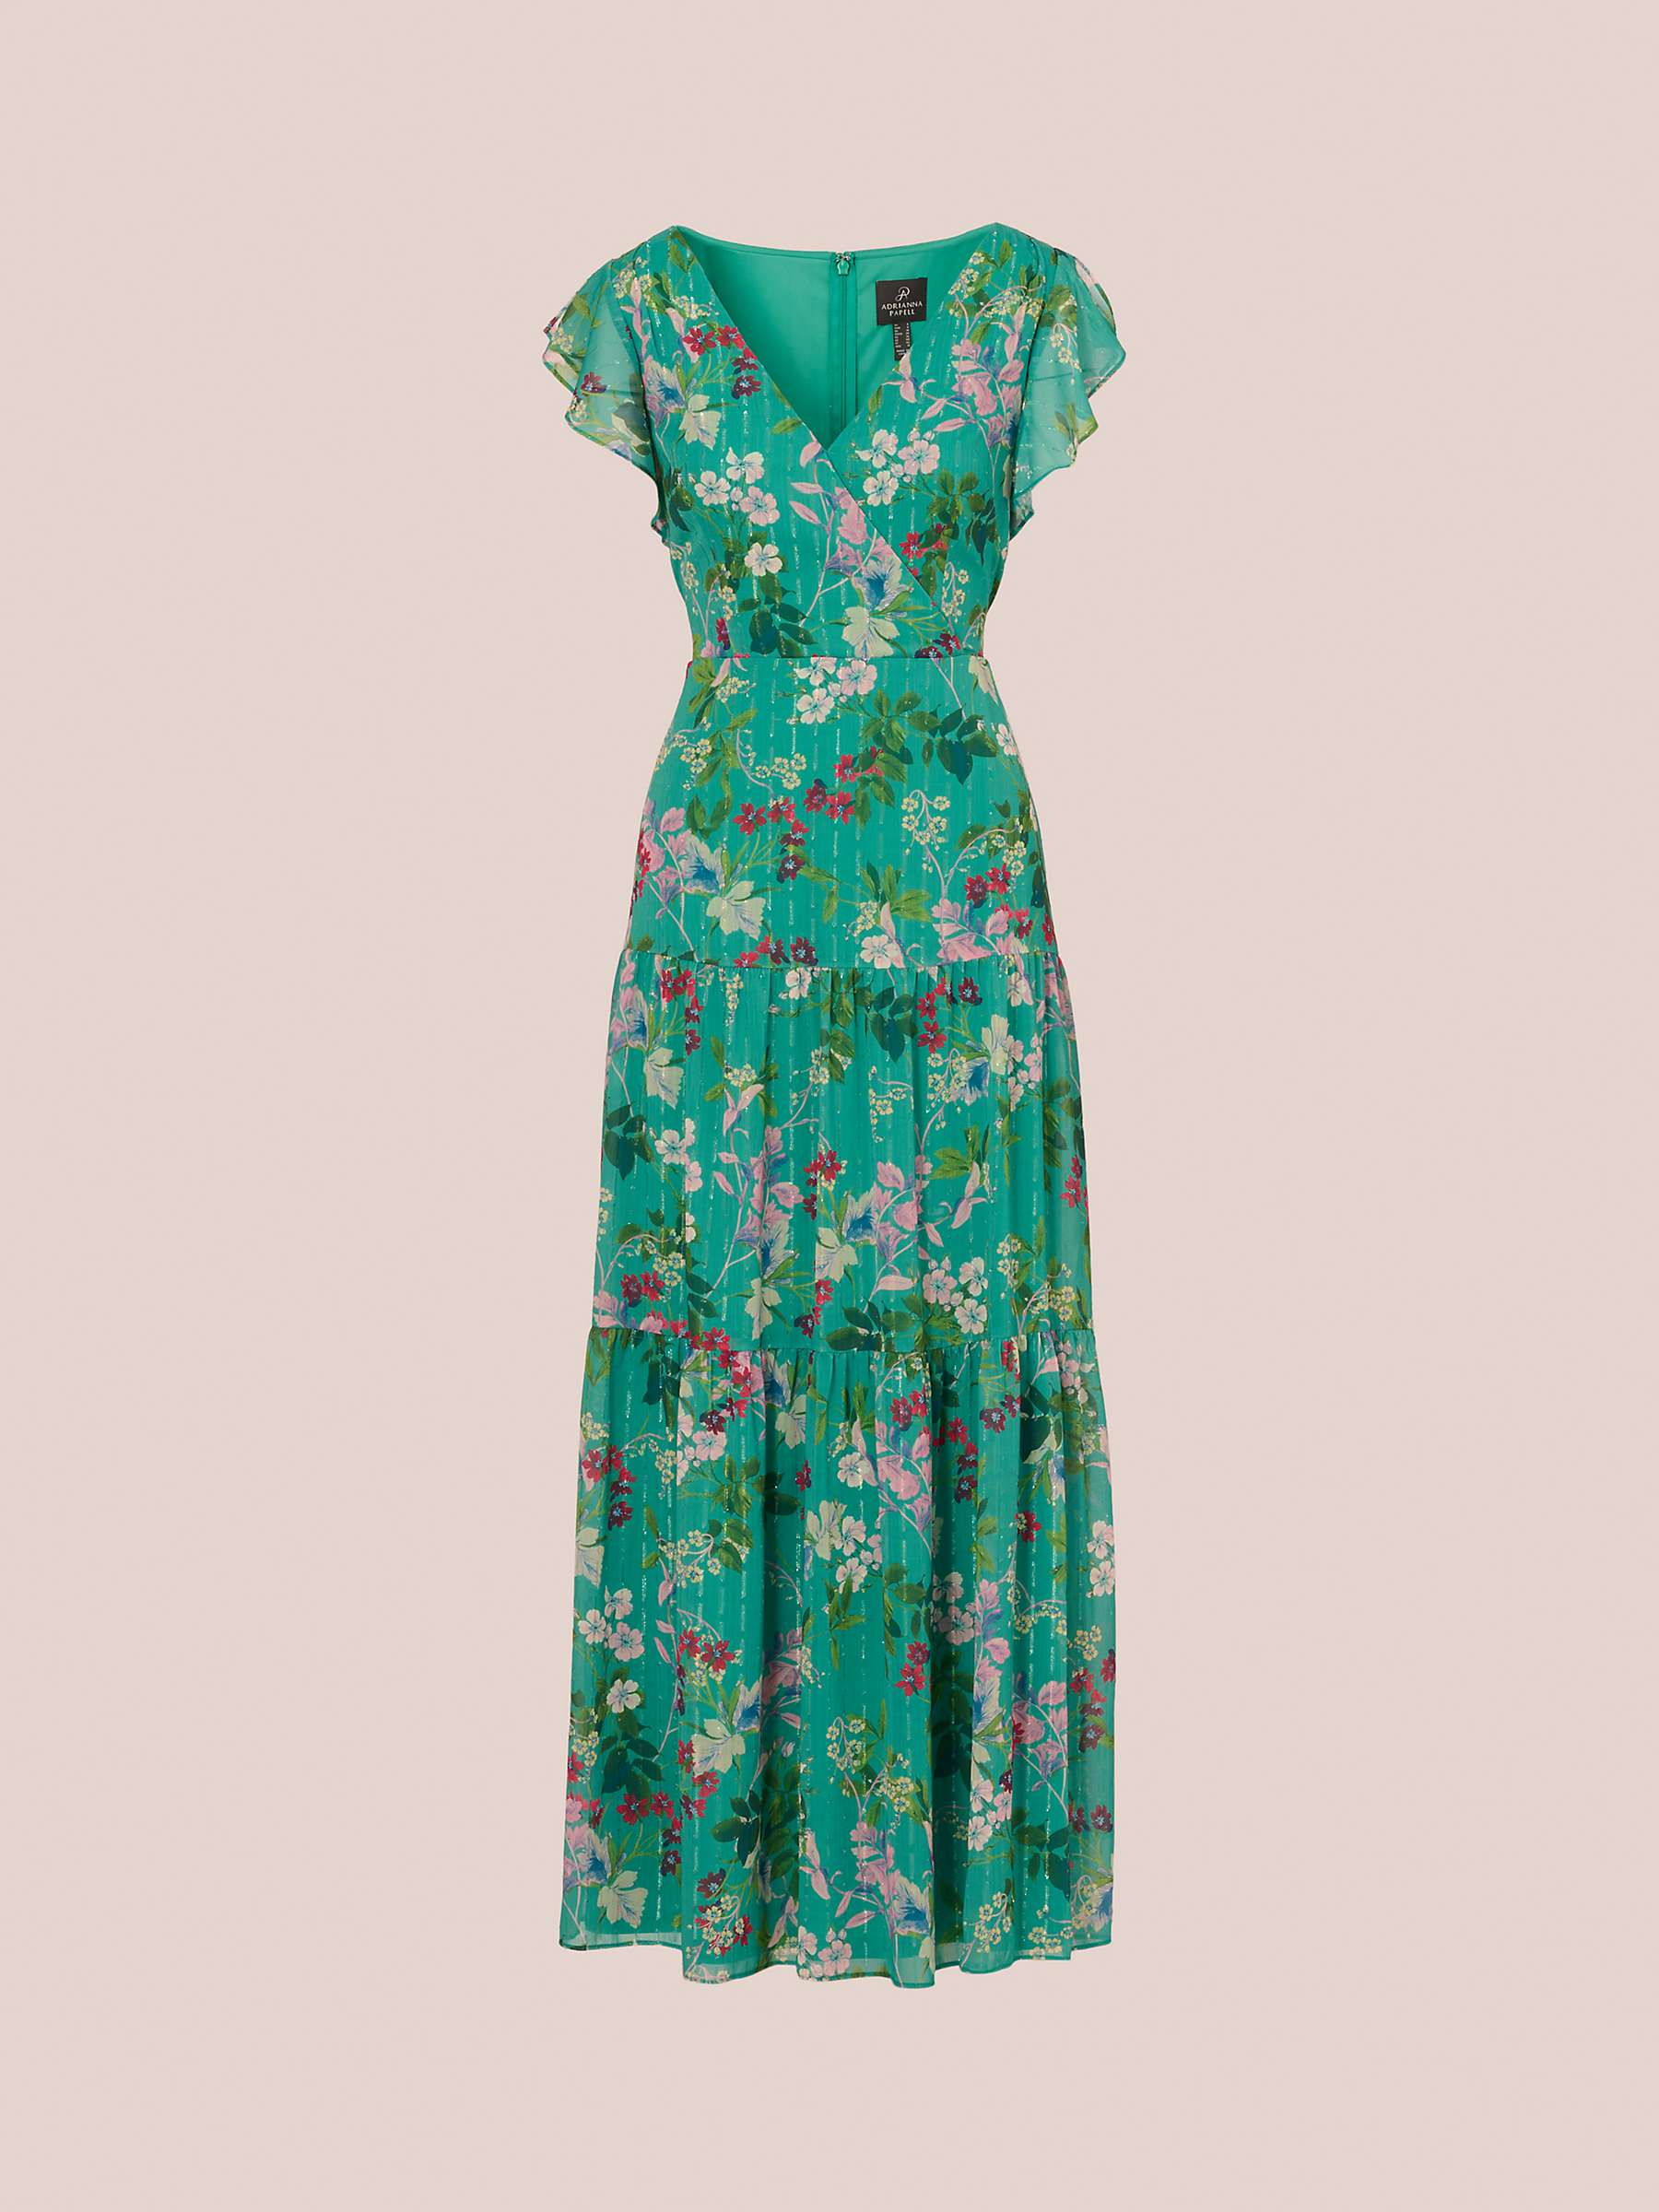 Buy Adrianna Papell Floral Tiered Maxi Dress, Green/Multi Online at johnlewis.com